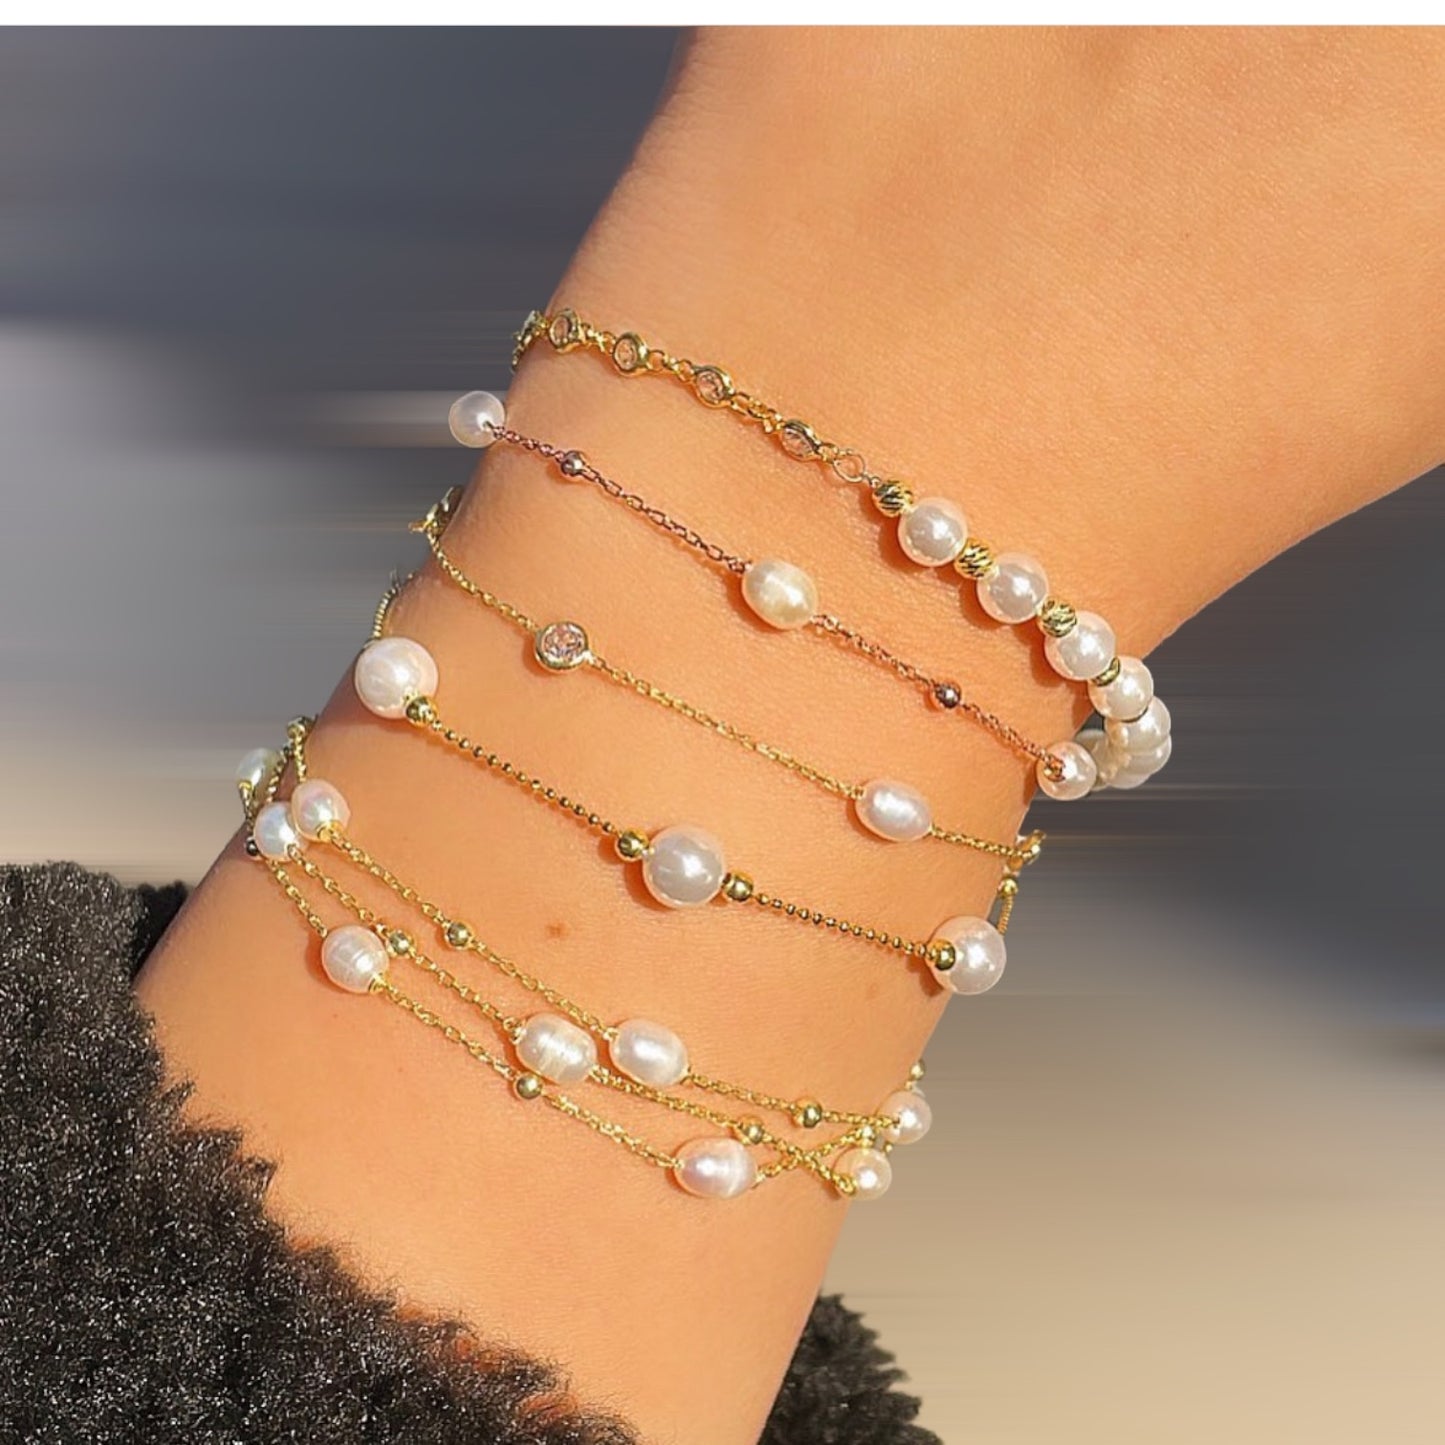 Lydian 925 sterling silver bracelet with pearls